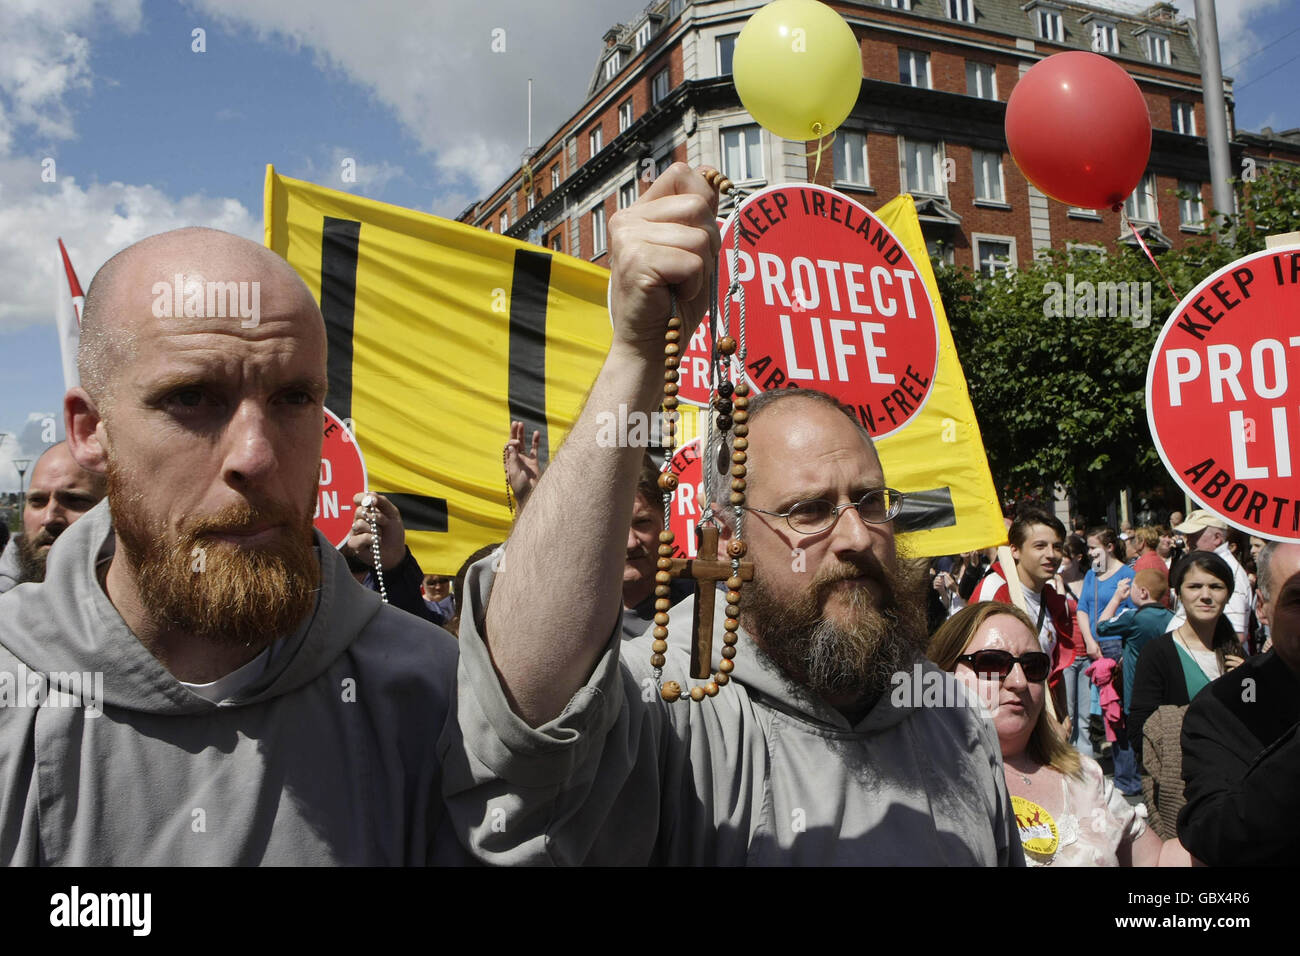 Pro choice and Pro Life protesters clash during a pro-abortion demonstration in the centre of Dublin. Stock Photo